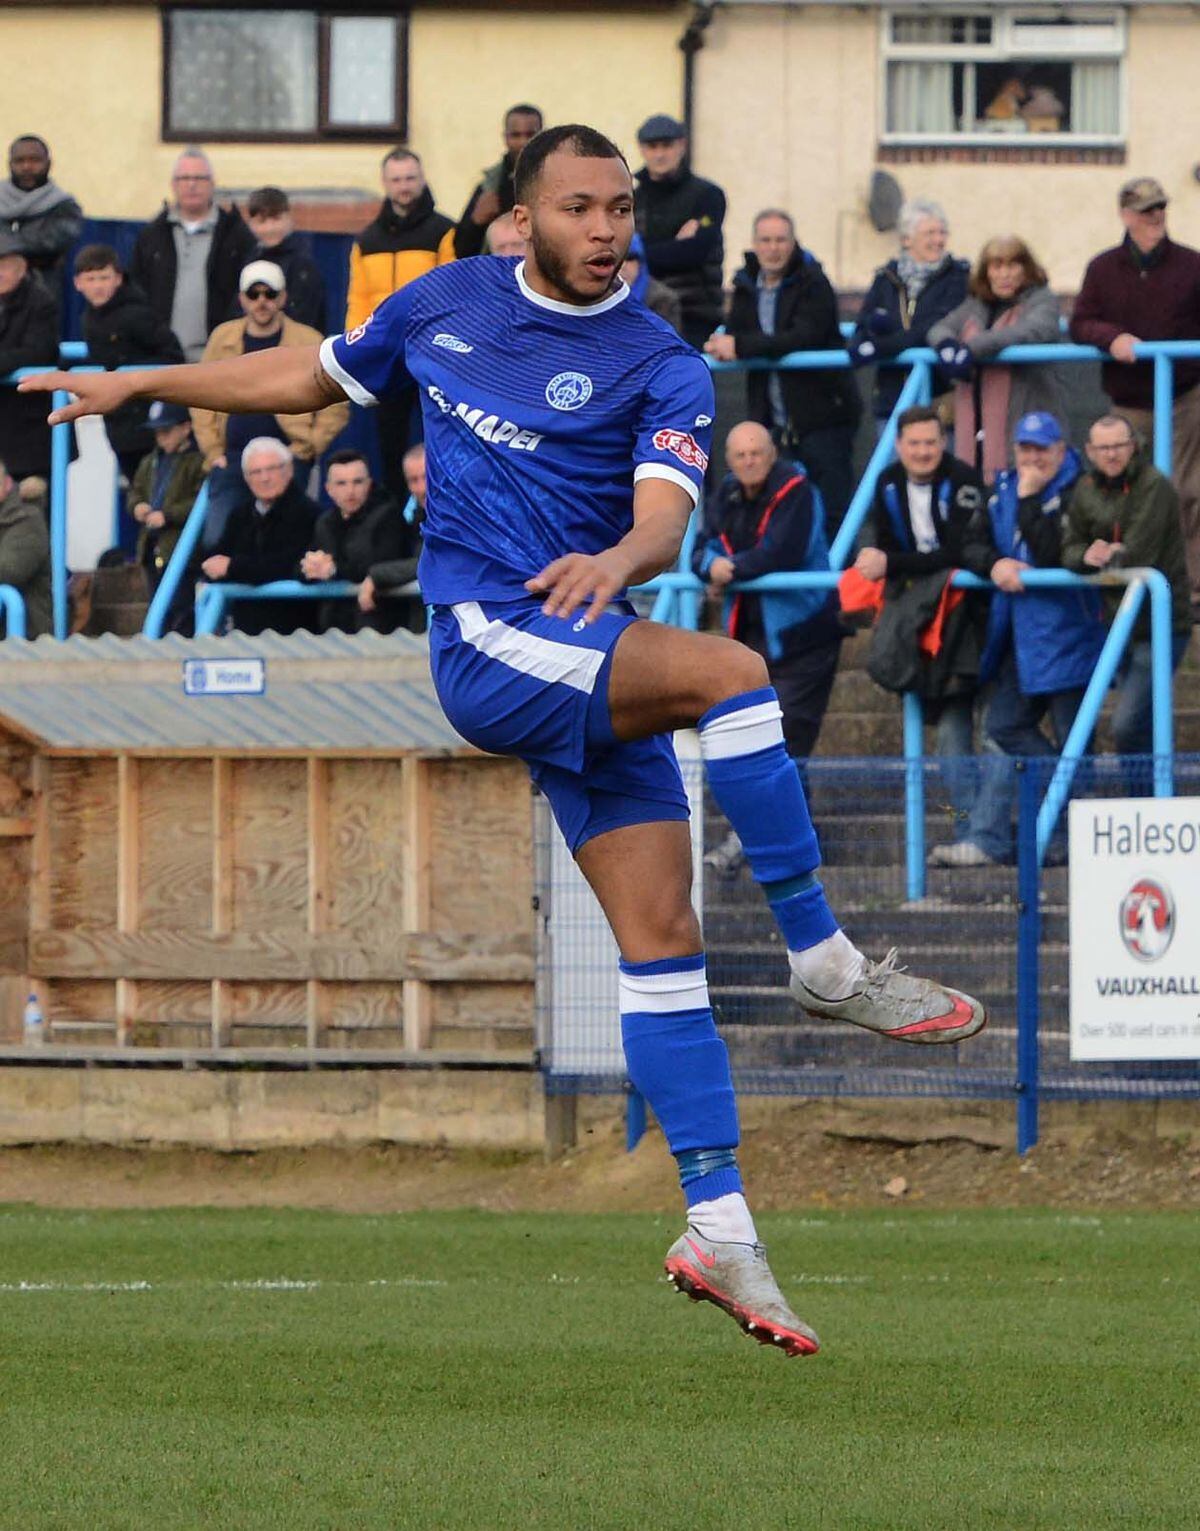 Samuel Griffiths in action for Halesowen Town